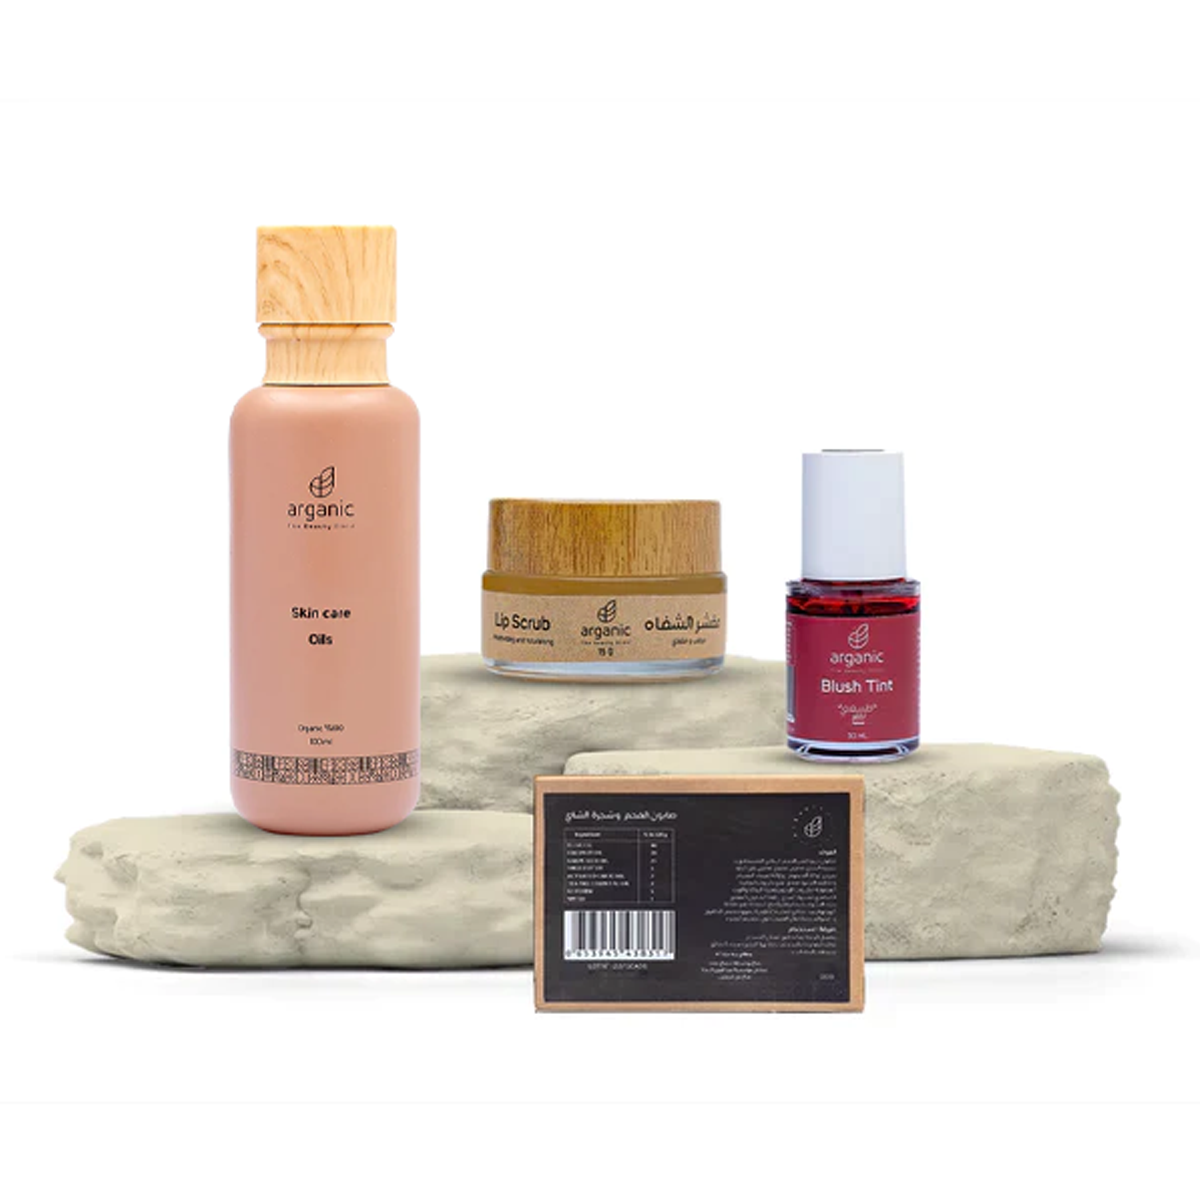 Artisanal skincare set with argan oil and red blush tint.